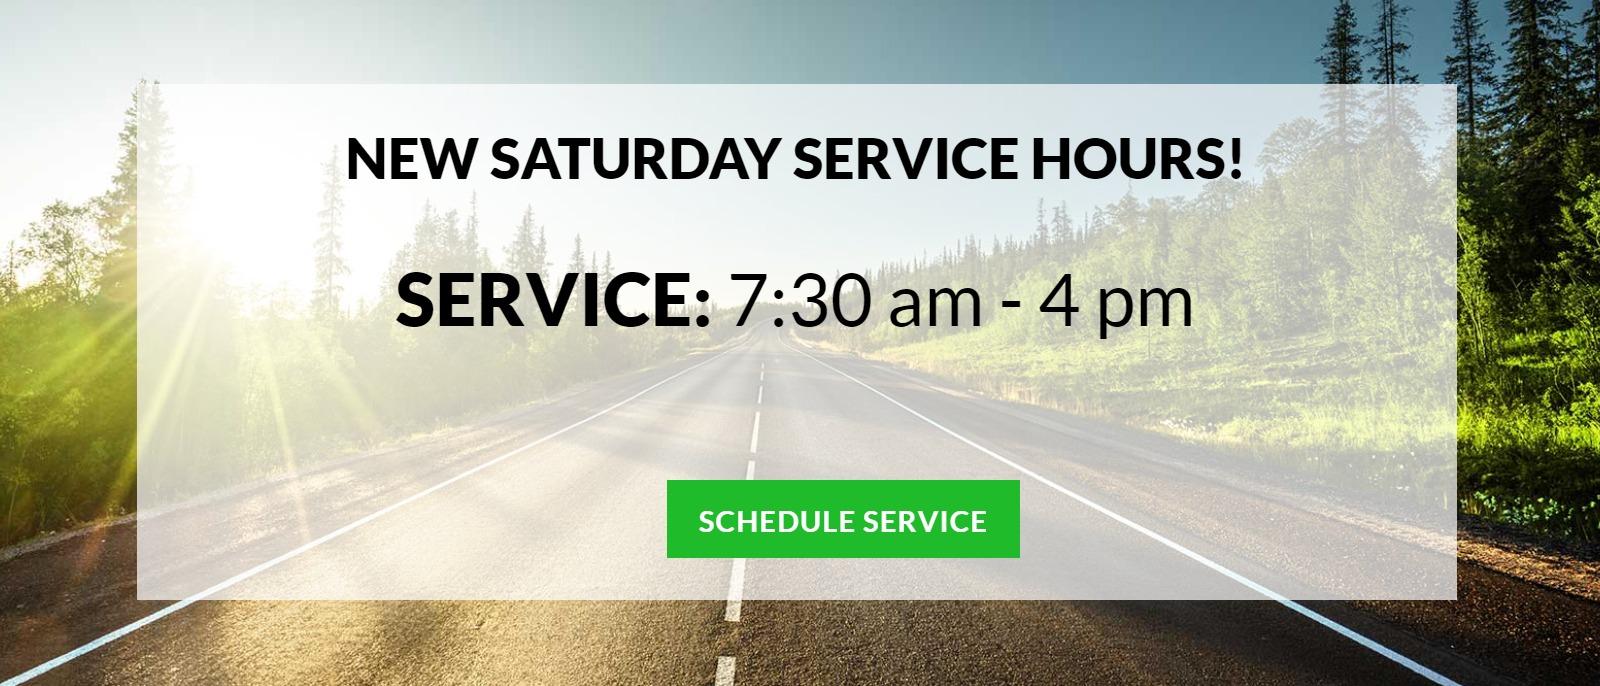 'NEW SATURDAY SALES AND SERVICE HOURS!
Service: 7:30 am - 4 pm
Sales: 9 am to 4 pm